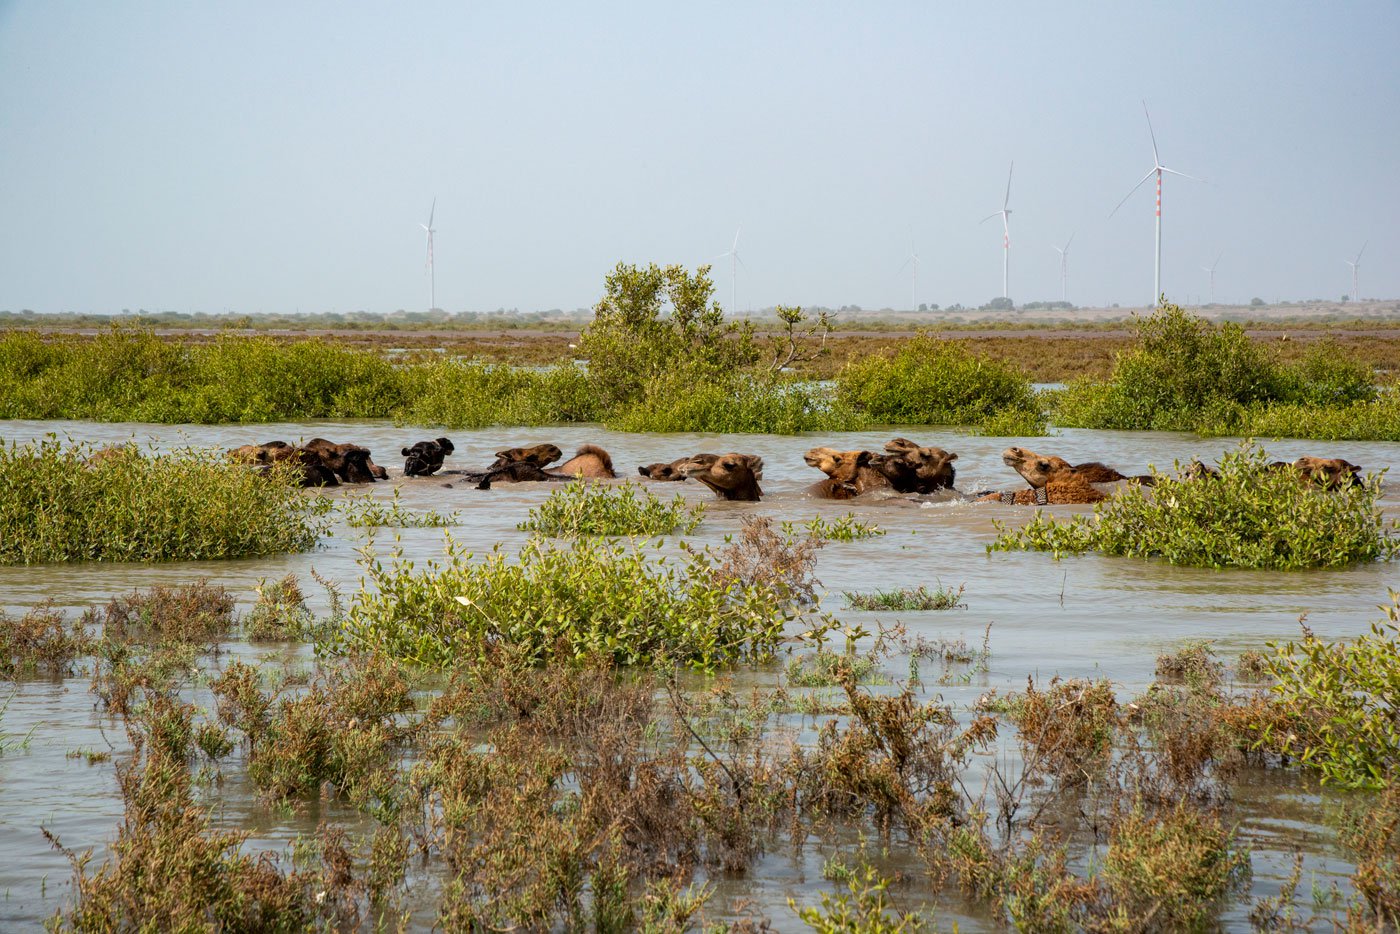 The Kharai camels swim to the mangroves as the water rises with high tide